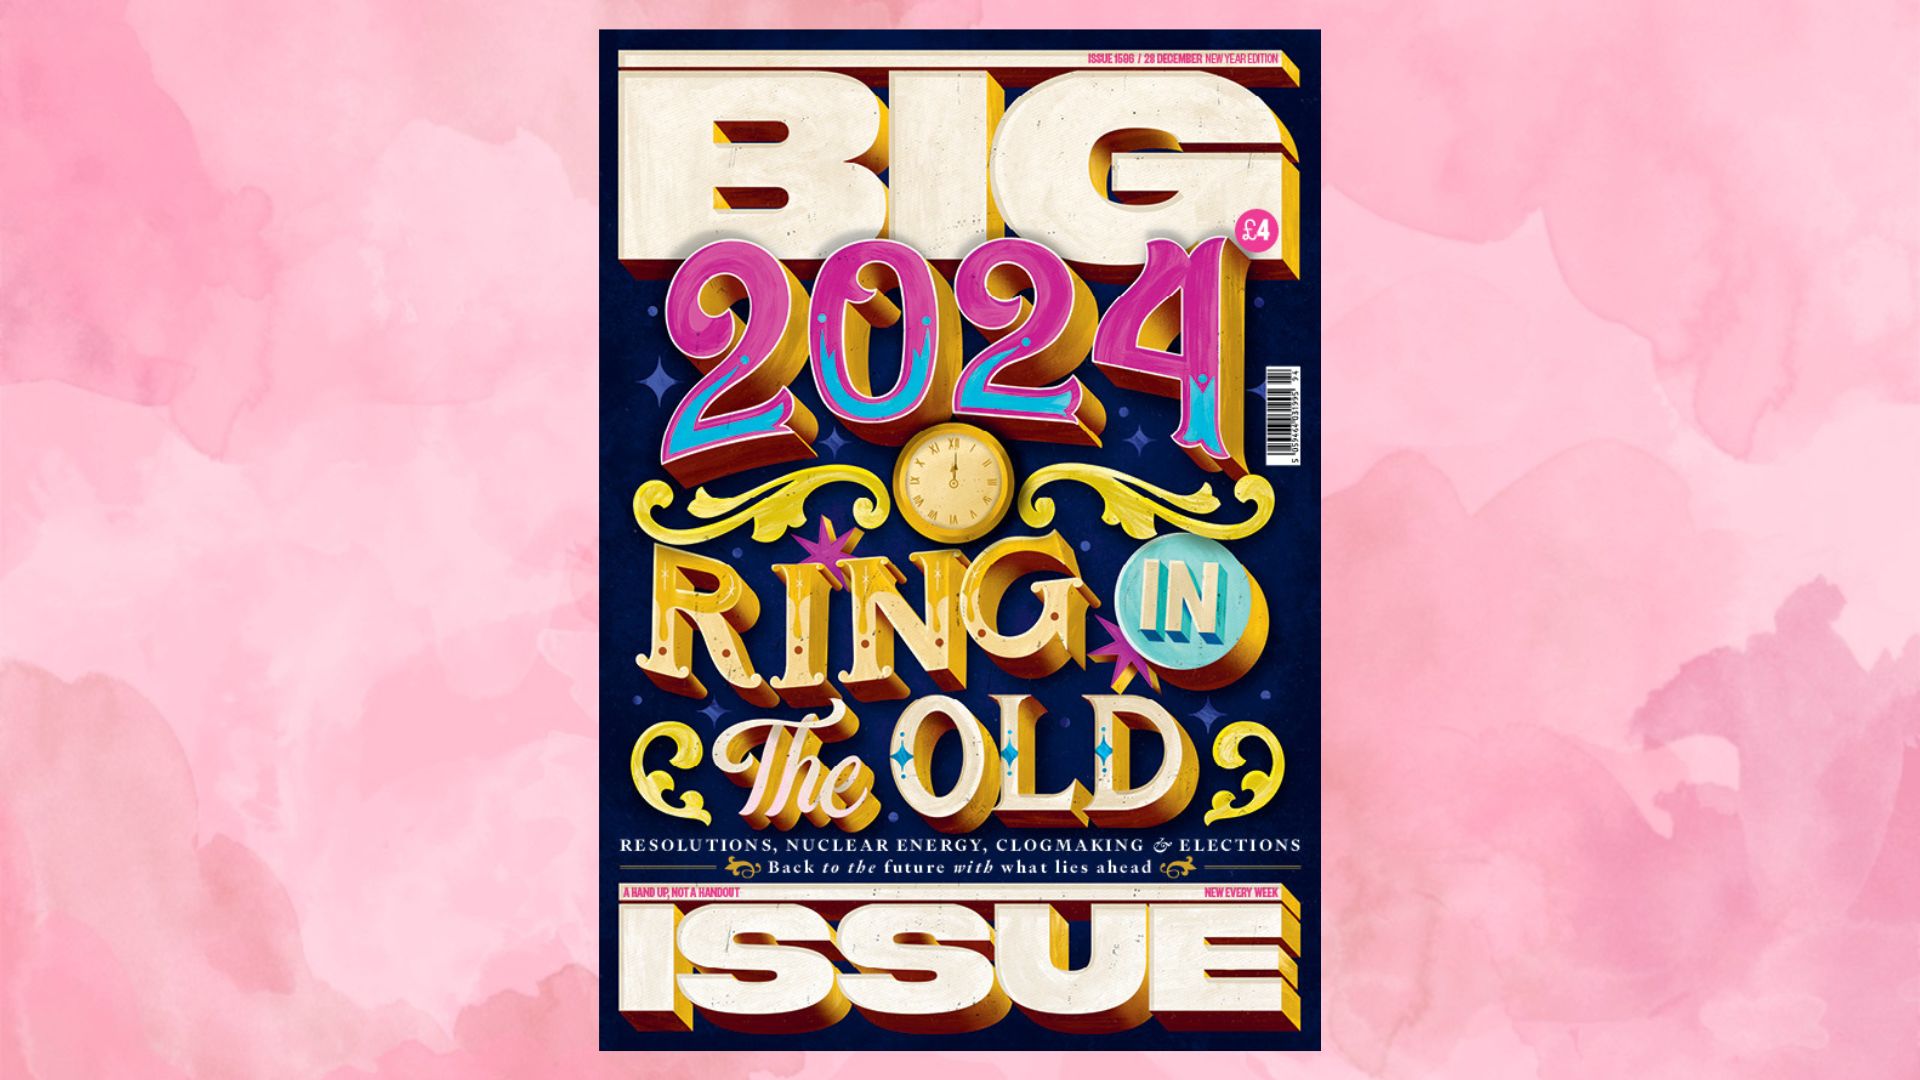 Cover of The Big Issue's New Year's special